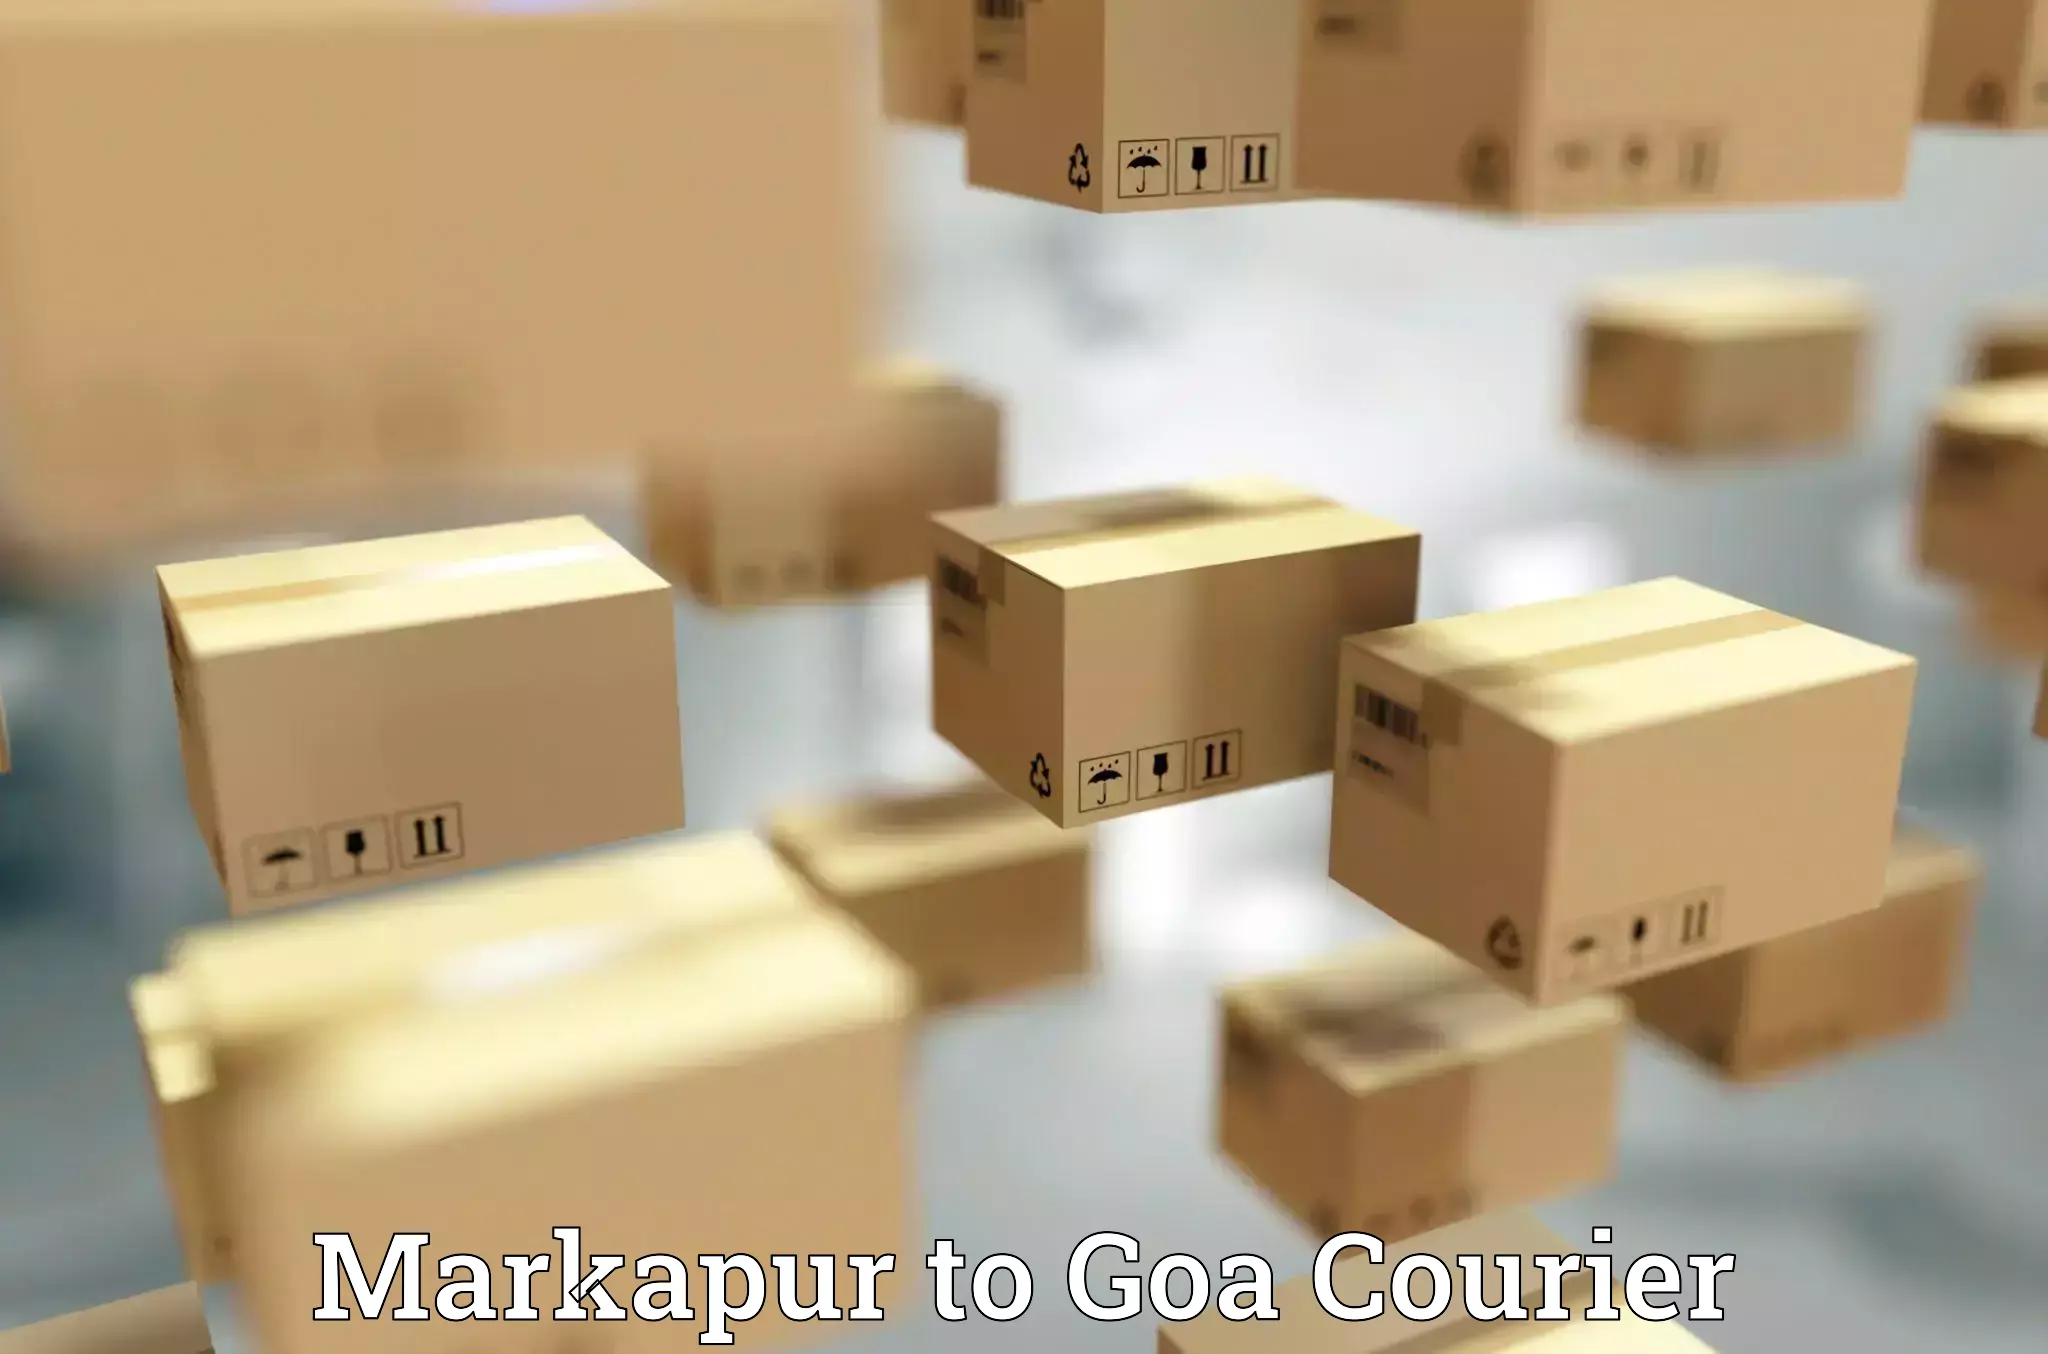 Seamless shipping experience in Markapur to Panjim